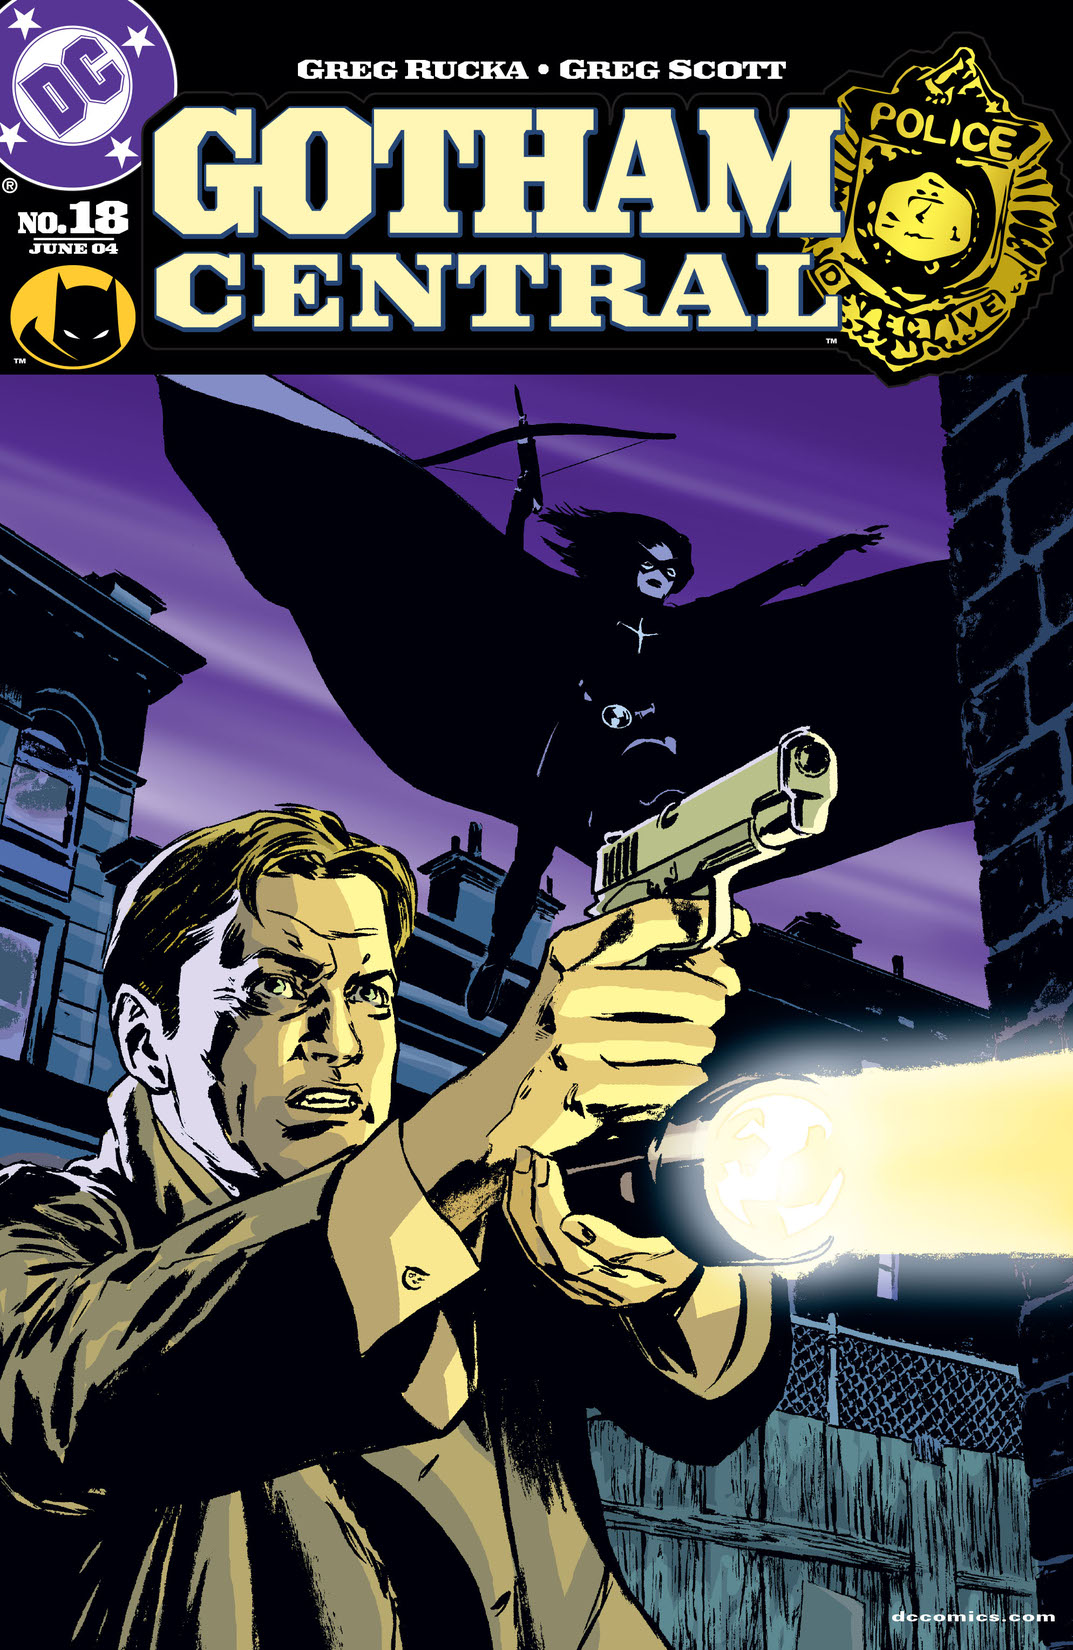 Gotham Central #18 preview images